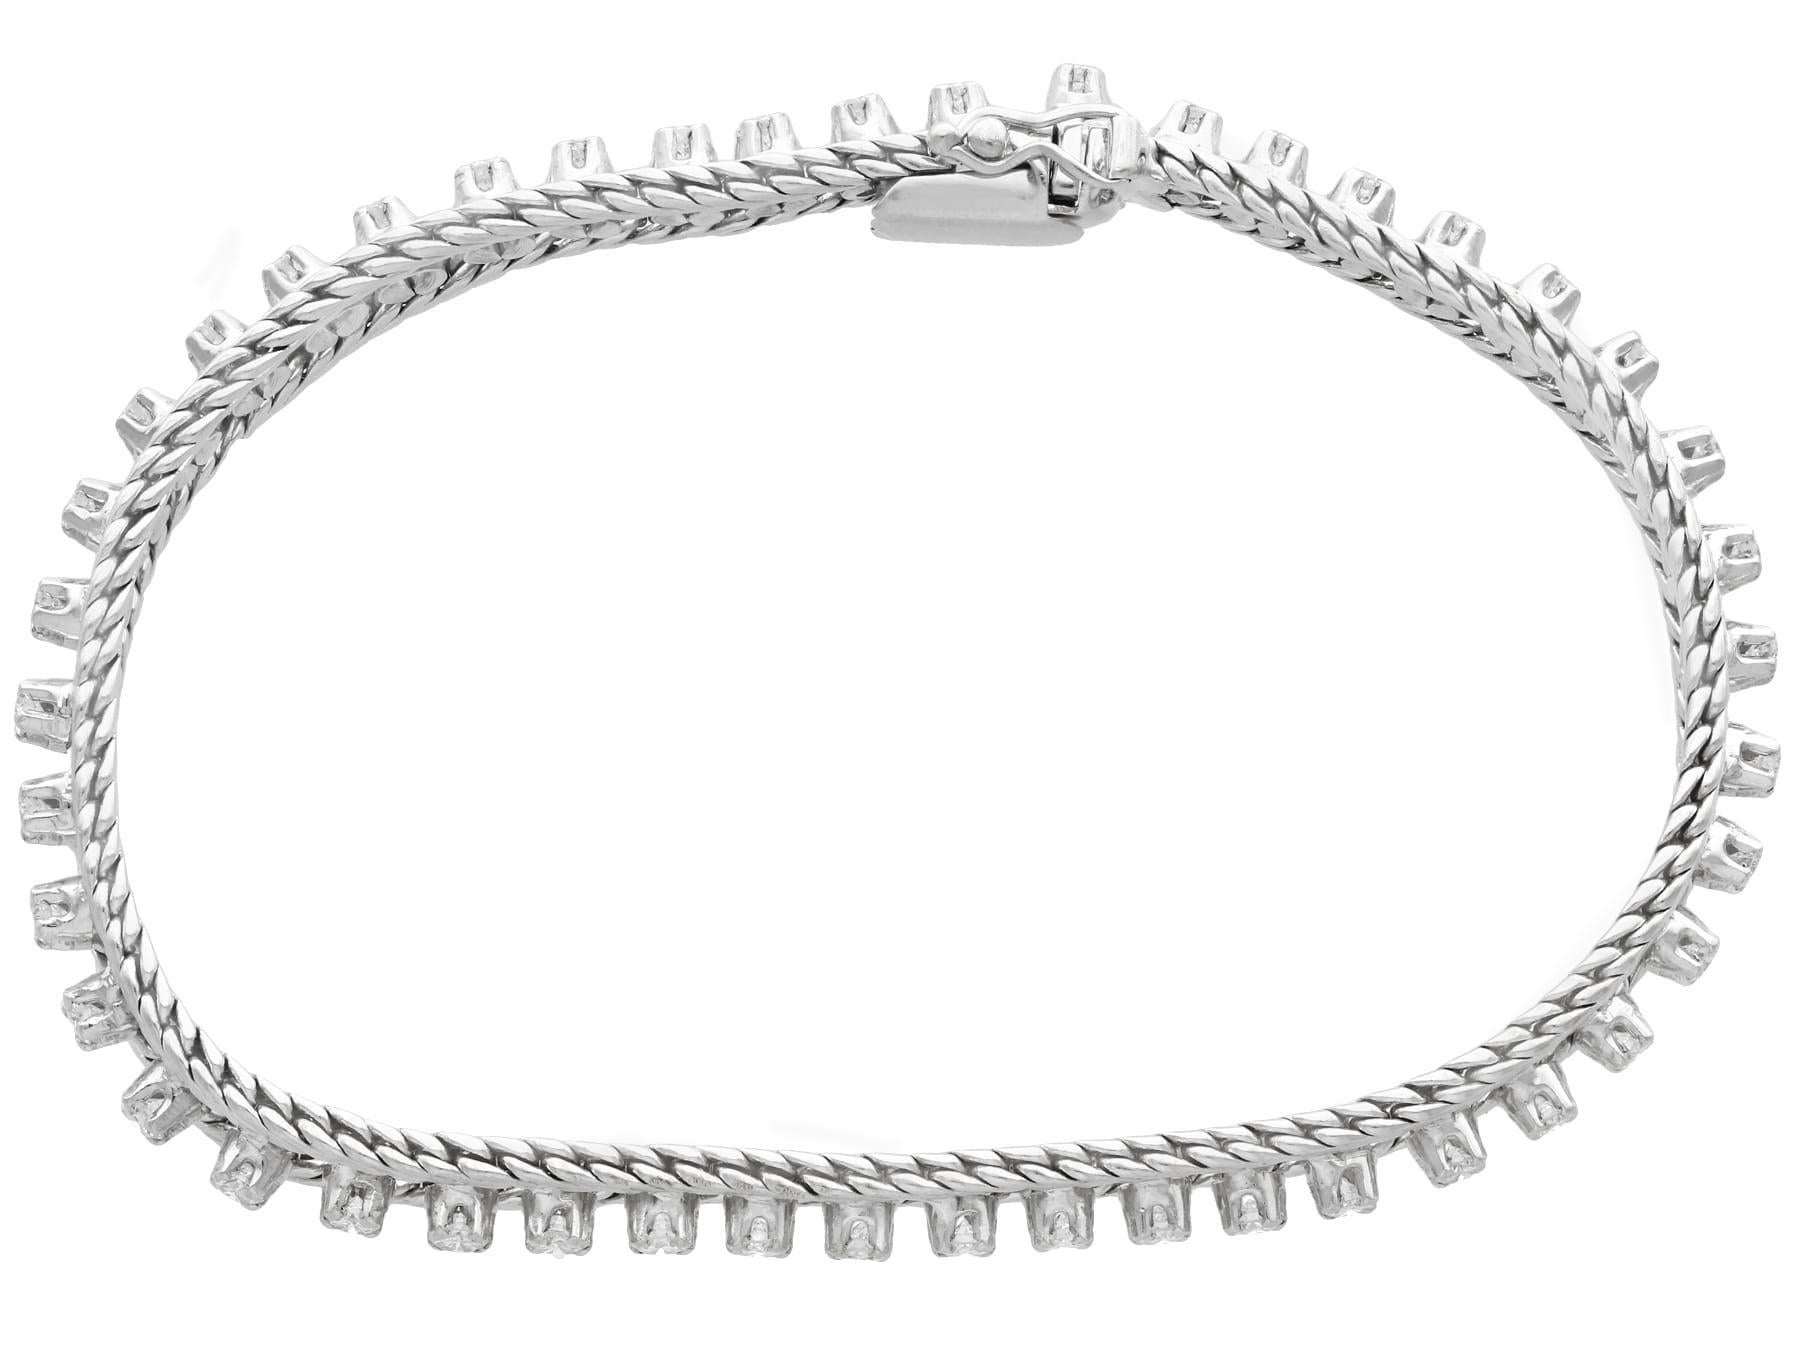 An impressive vintage 2.20 carat diamond, 18 karat white gold bracelet; part of our diverse gemstone bracelet collections

This fine and impressive vintage 1970s diamond bracelet has been crafted in 18k white gold.

The impressive setting of this